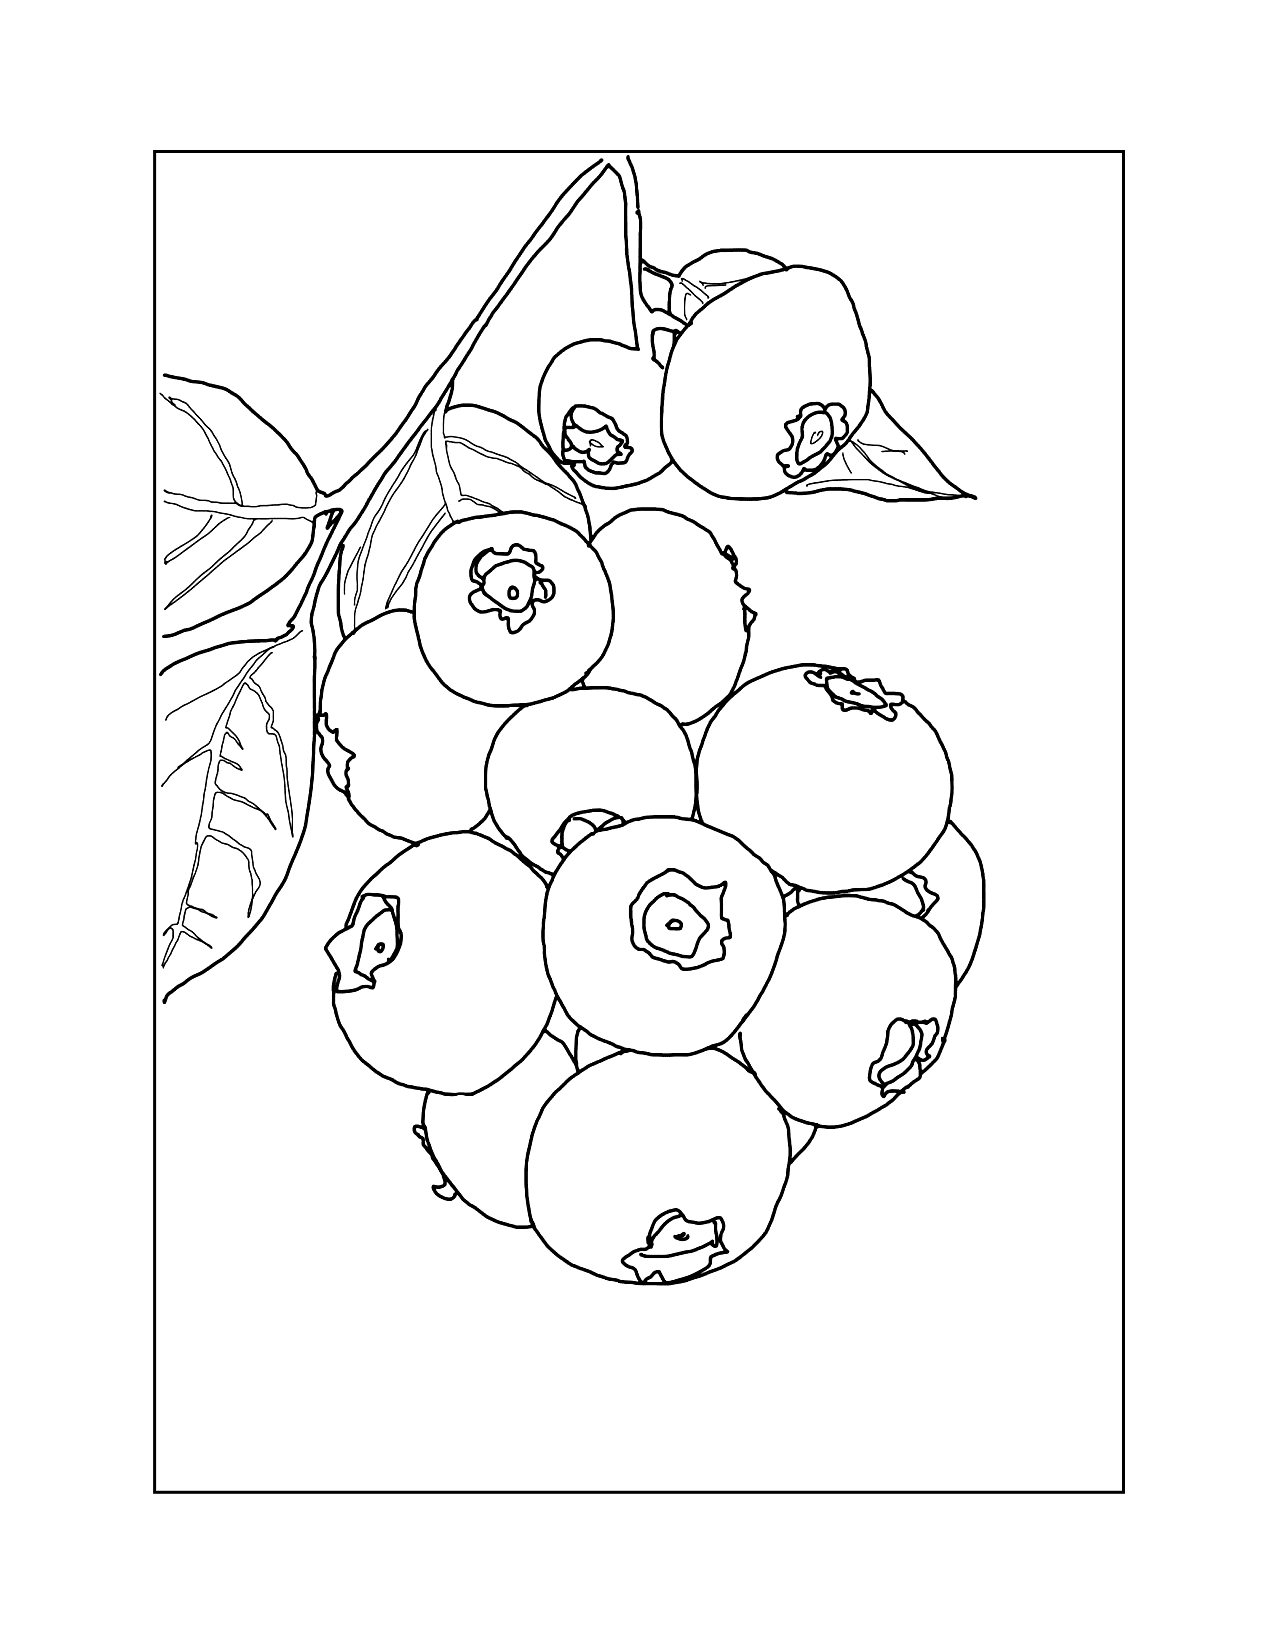 Hanging Blueberries Coloring Page